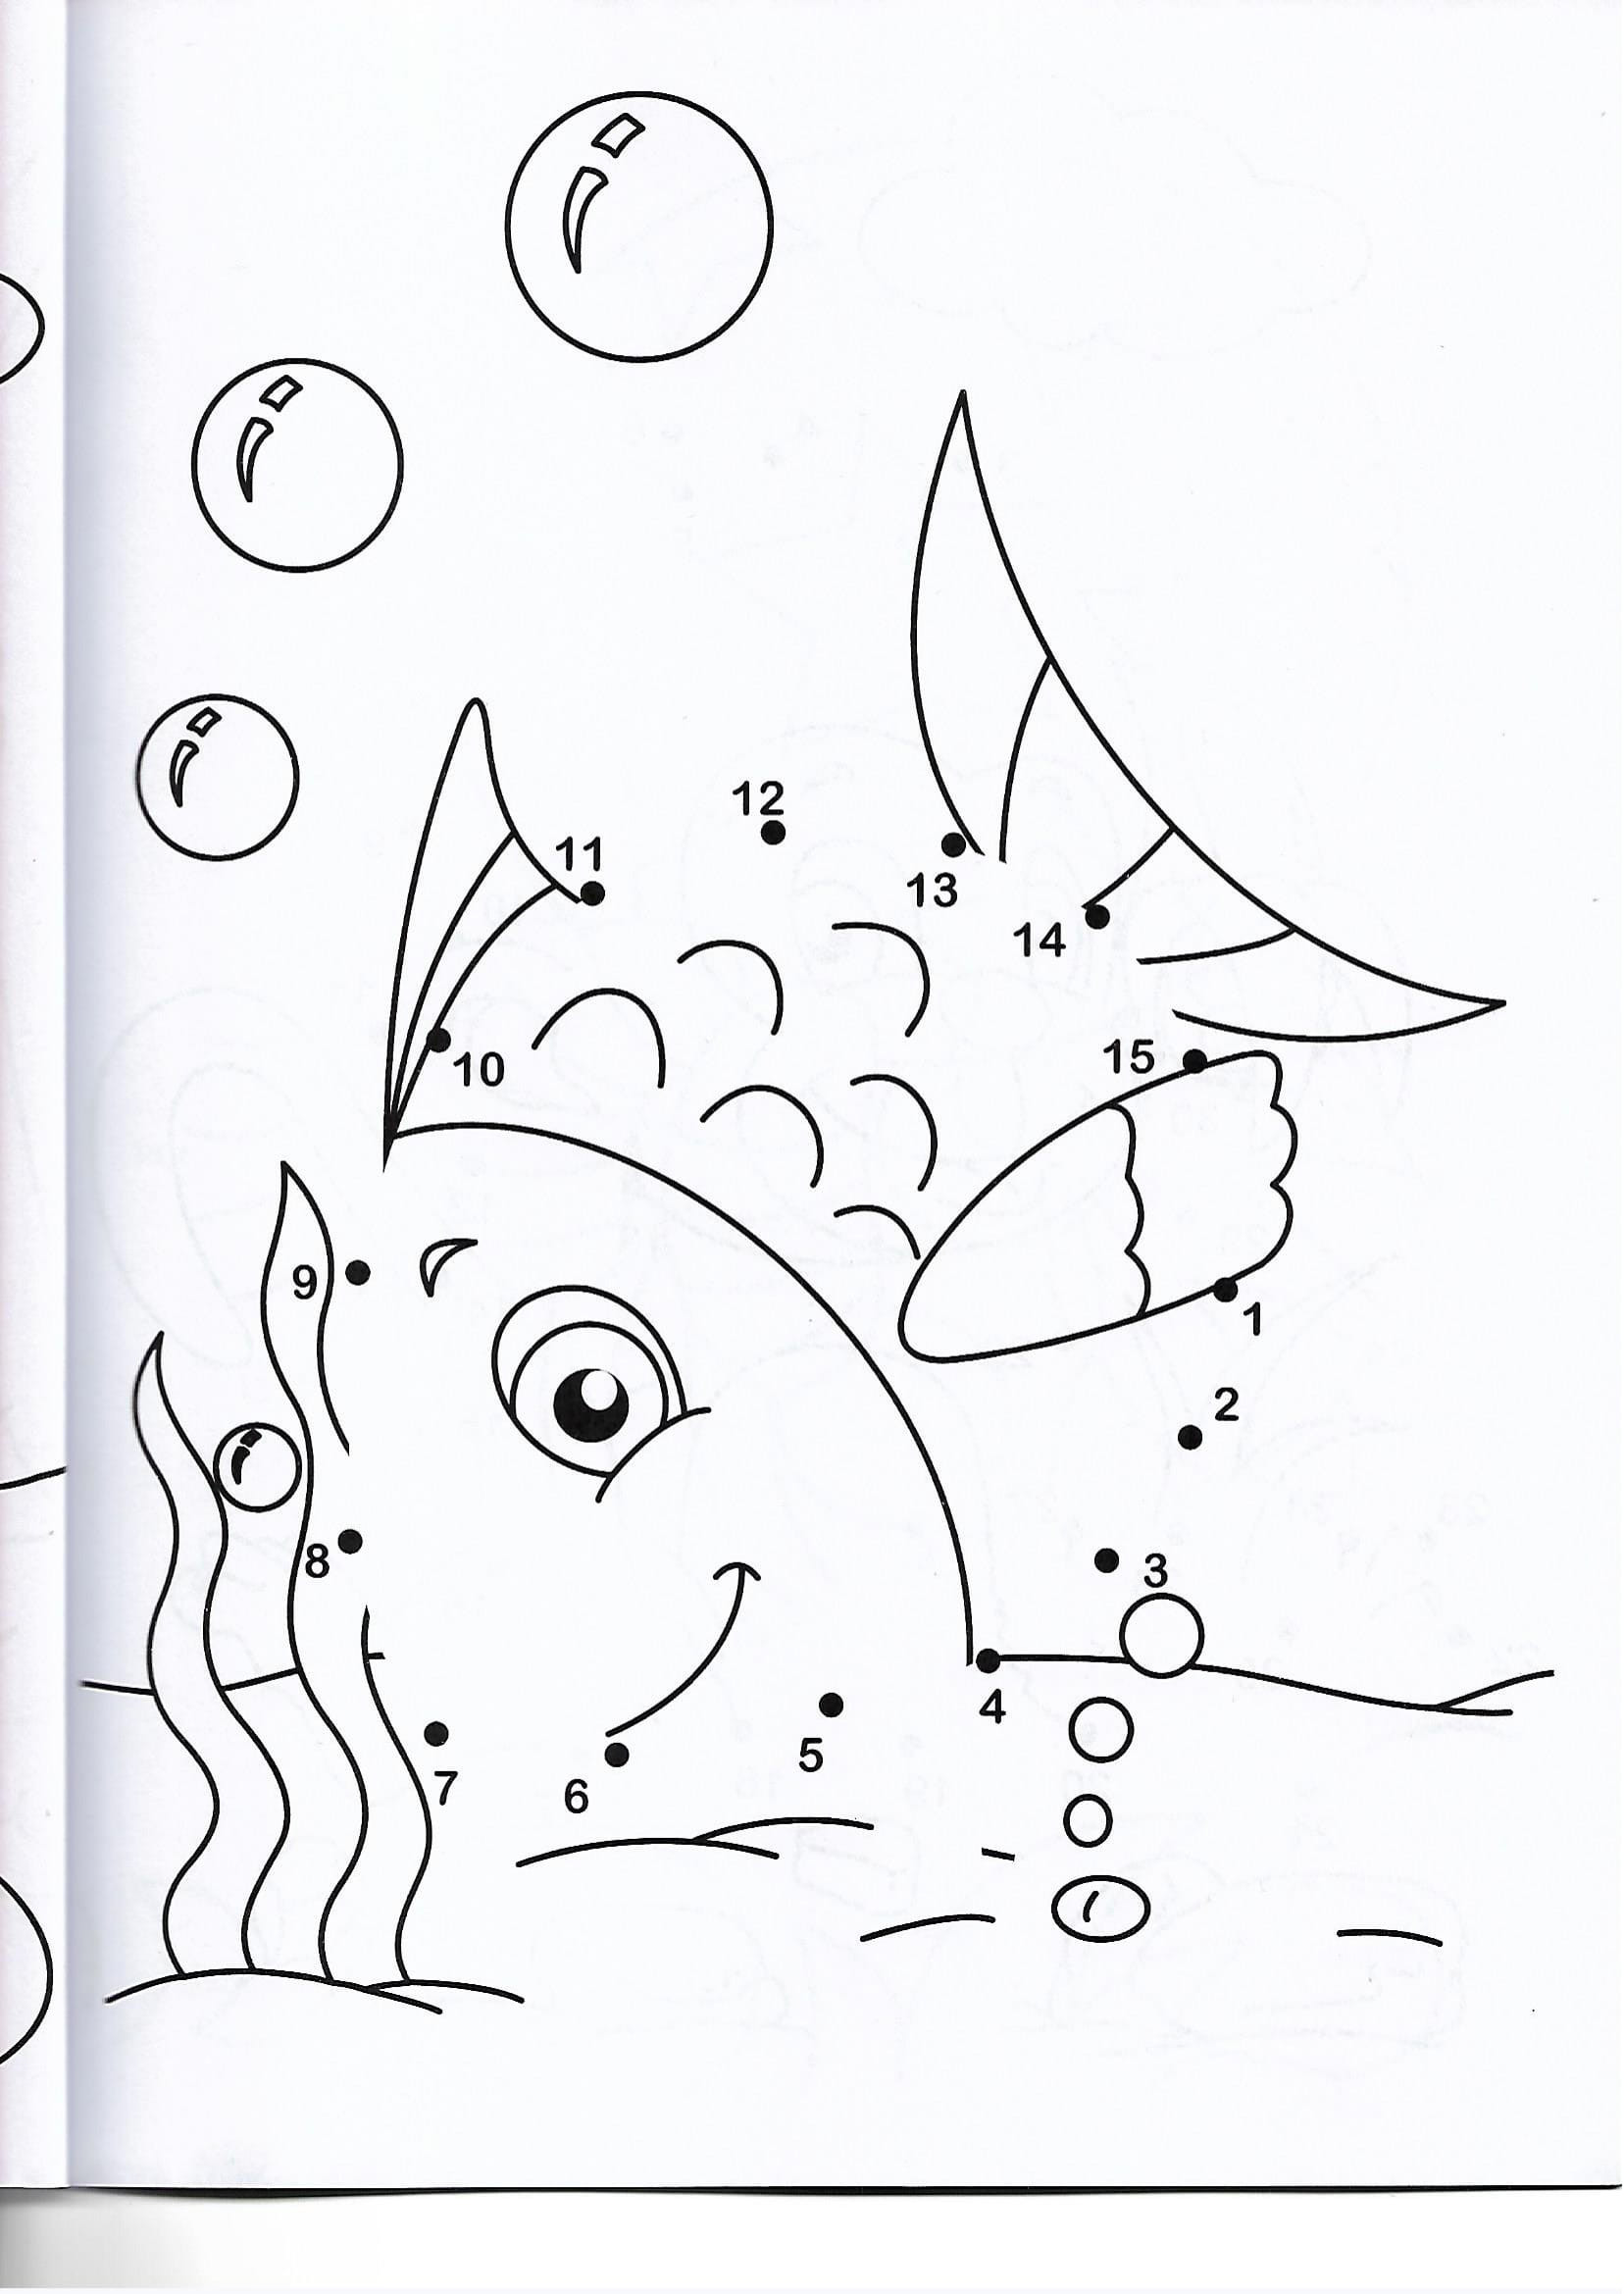 Easy Connect the Dots Printables Fish Animal Printable Dot to Dot – Connect the Dots Numbers